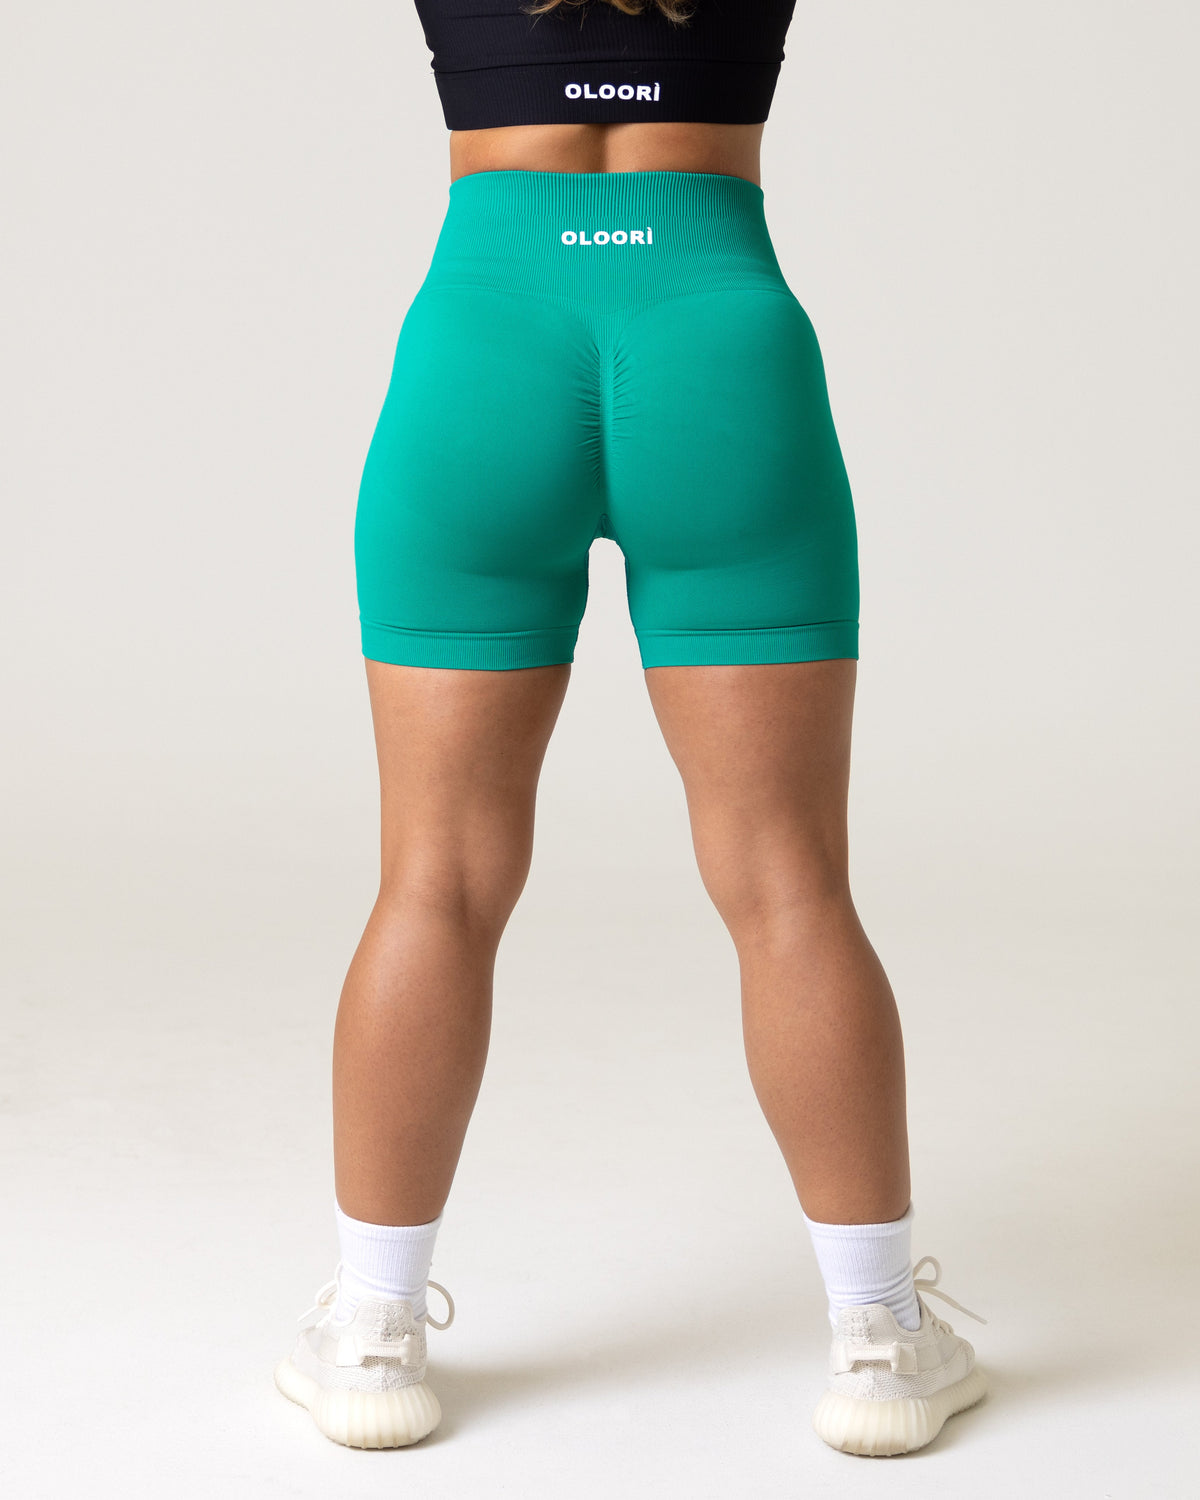 A woman wearing the best athletic shorts for women